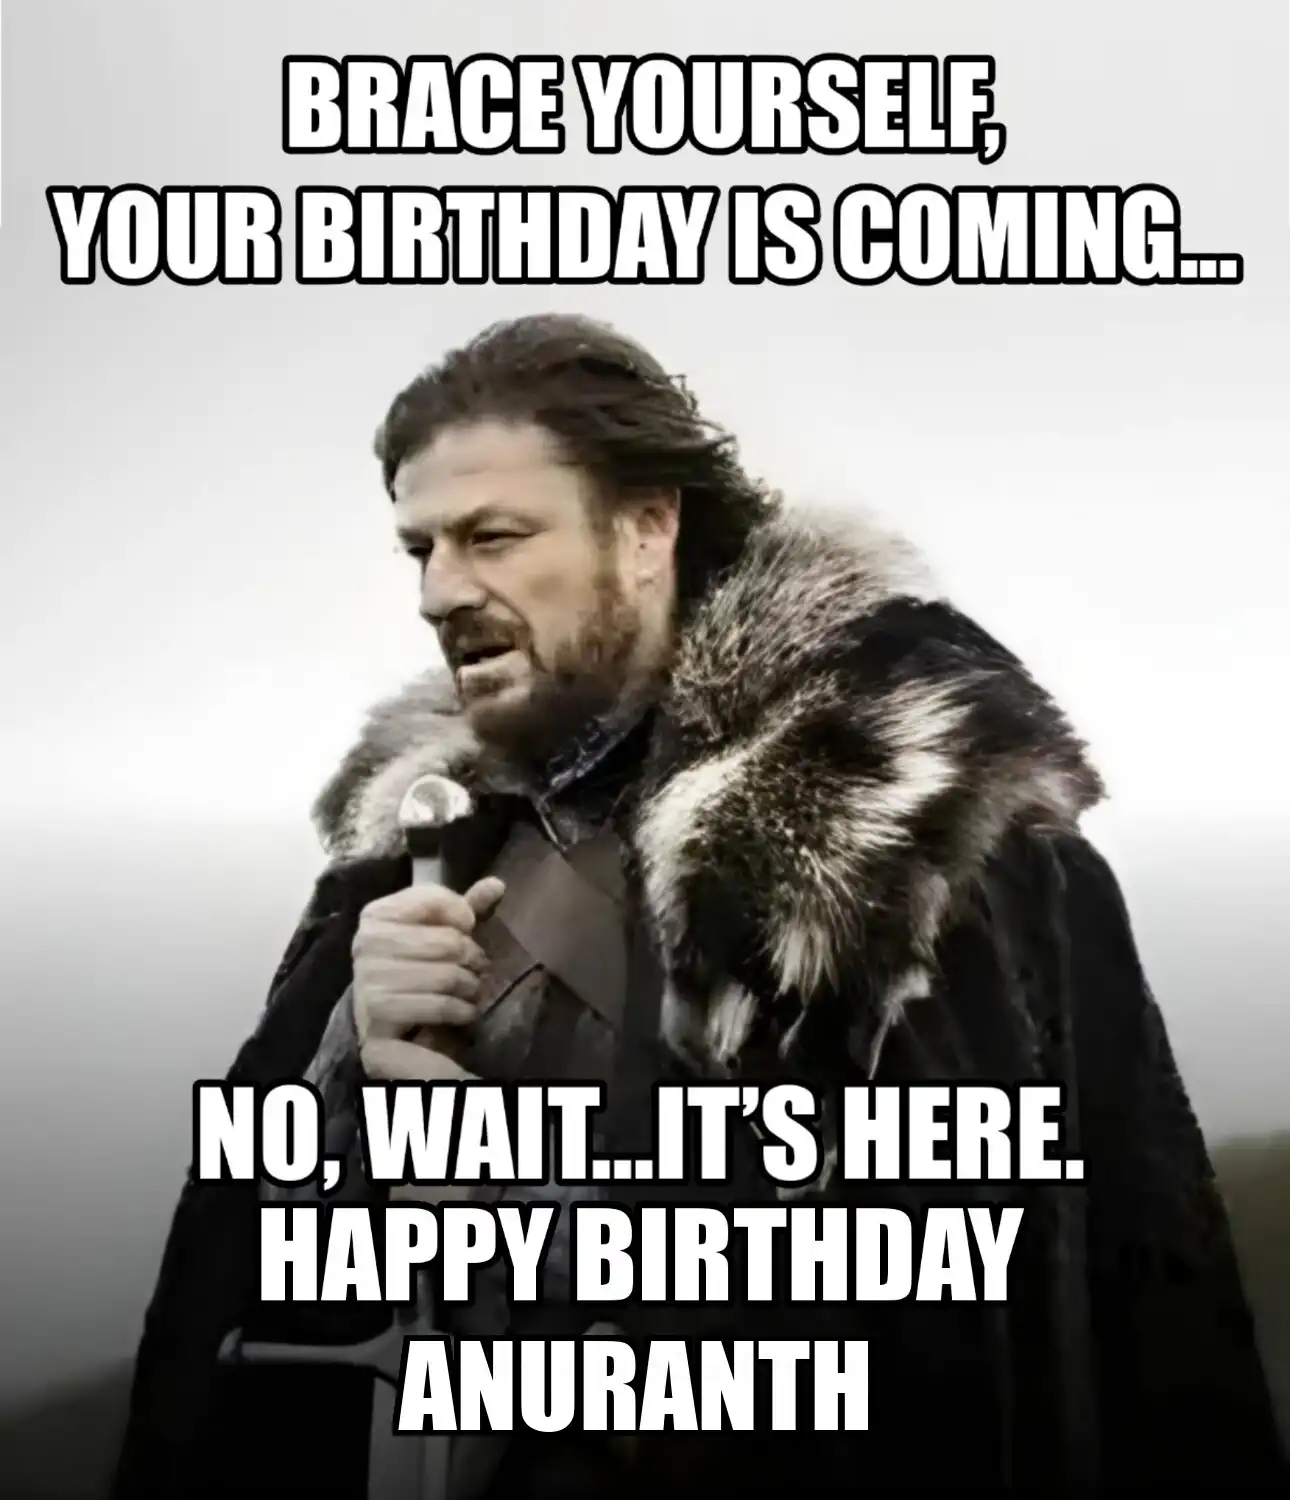 Happy Birthday Anuranth Brace Yourself Your Birthday Is Coming Meme